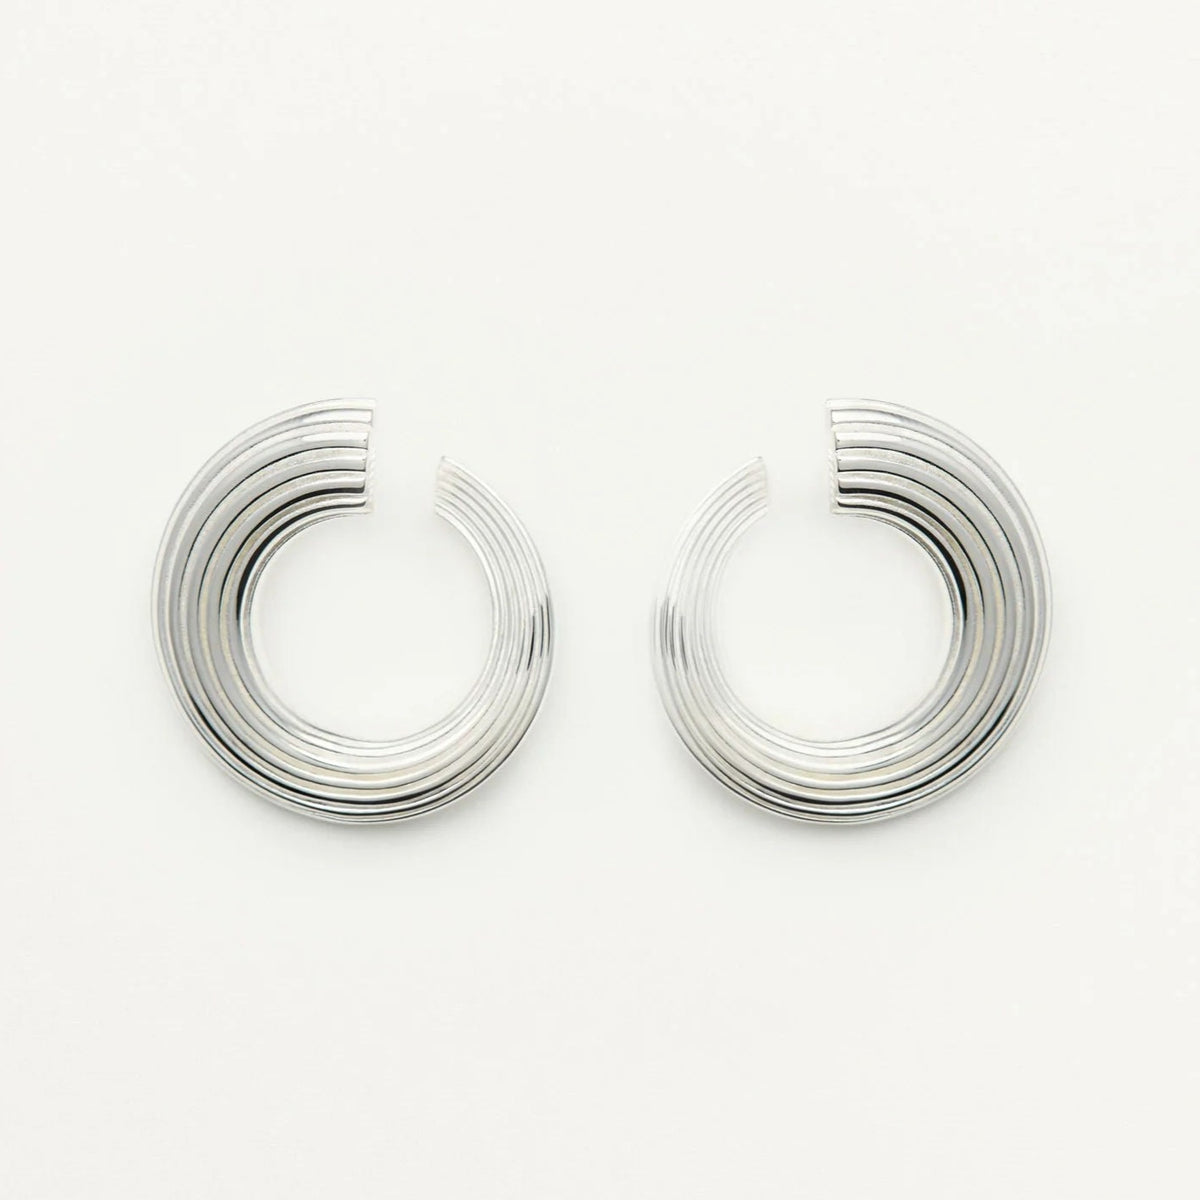 Croissance Illimitée Earrings – Sterling Silver - Boutee